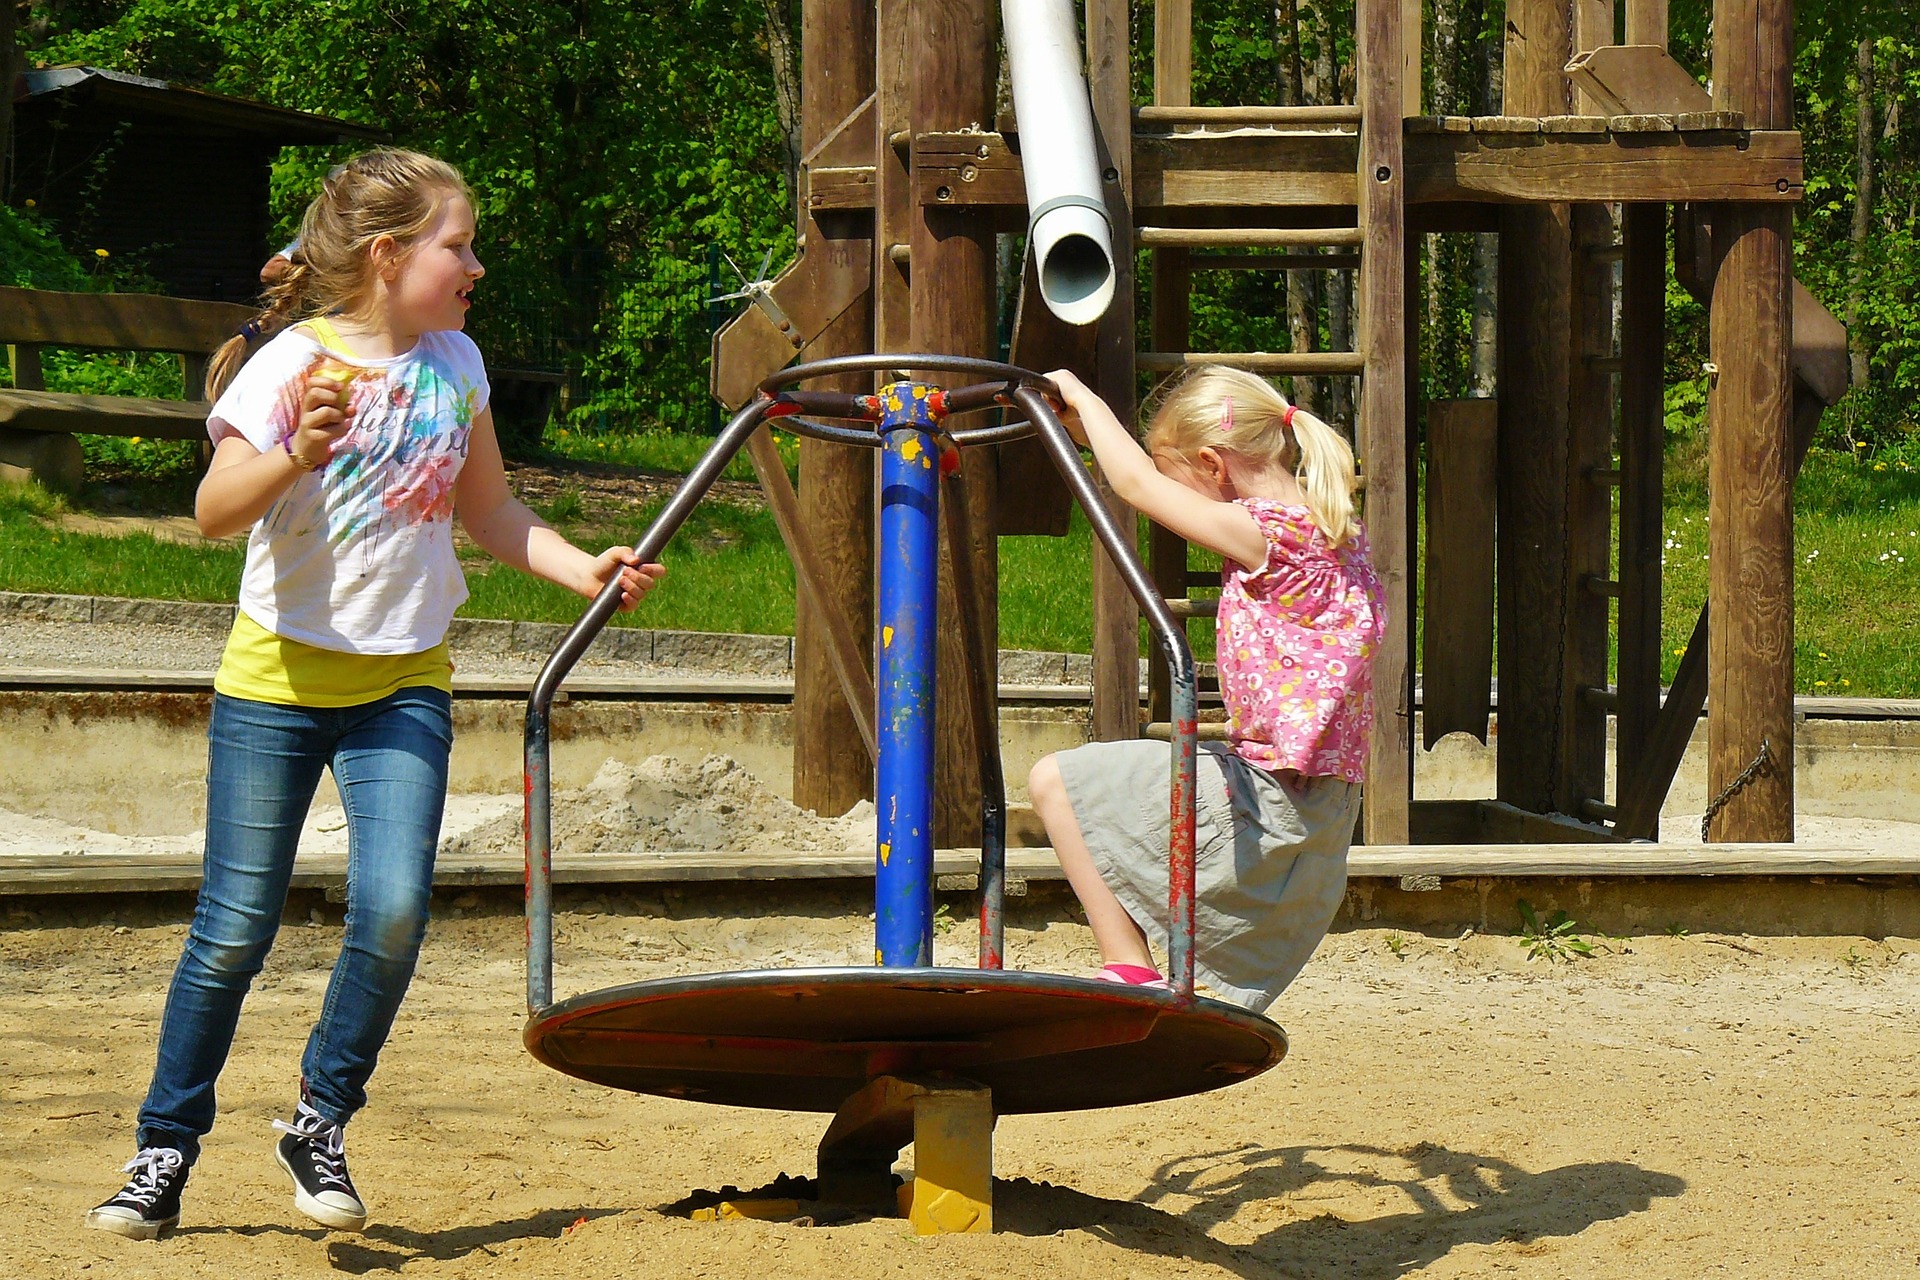 Two kids playing with a carousel at a playground.